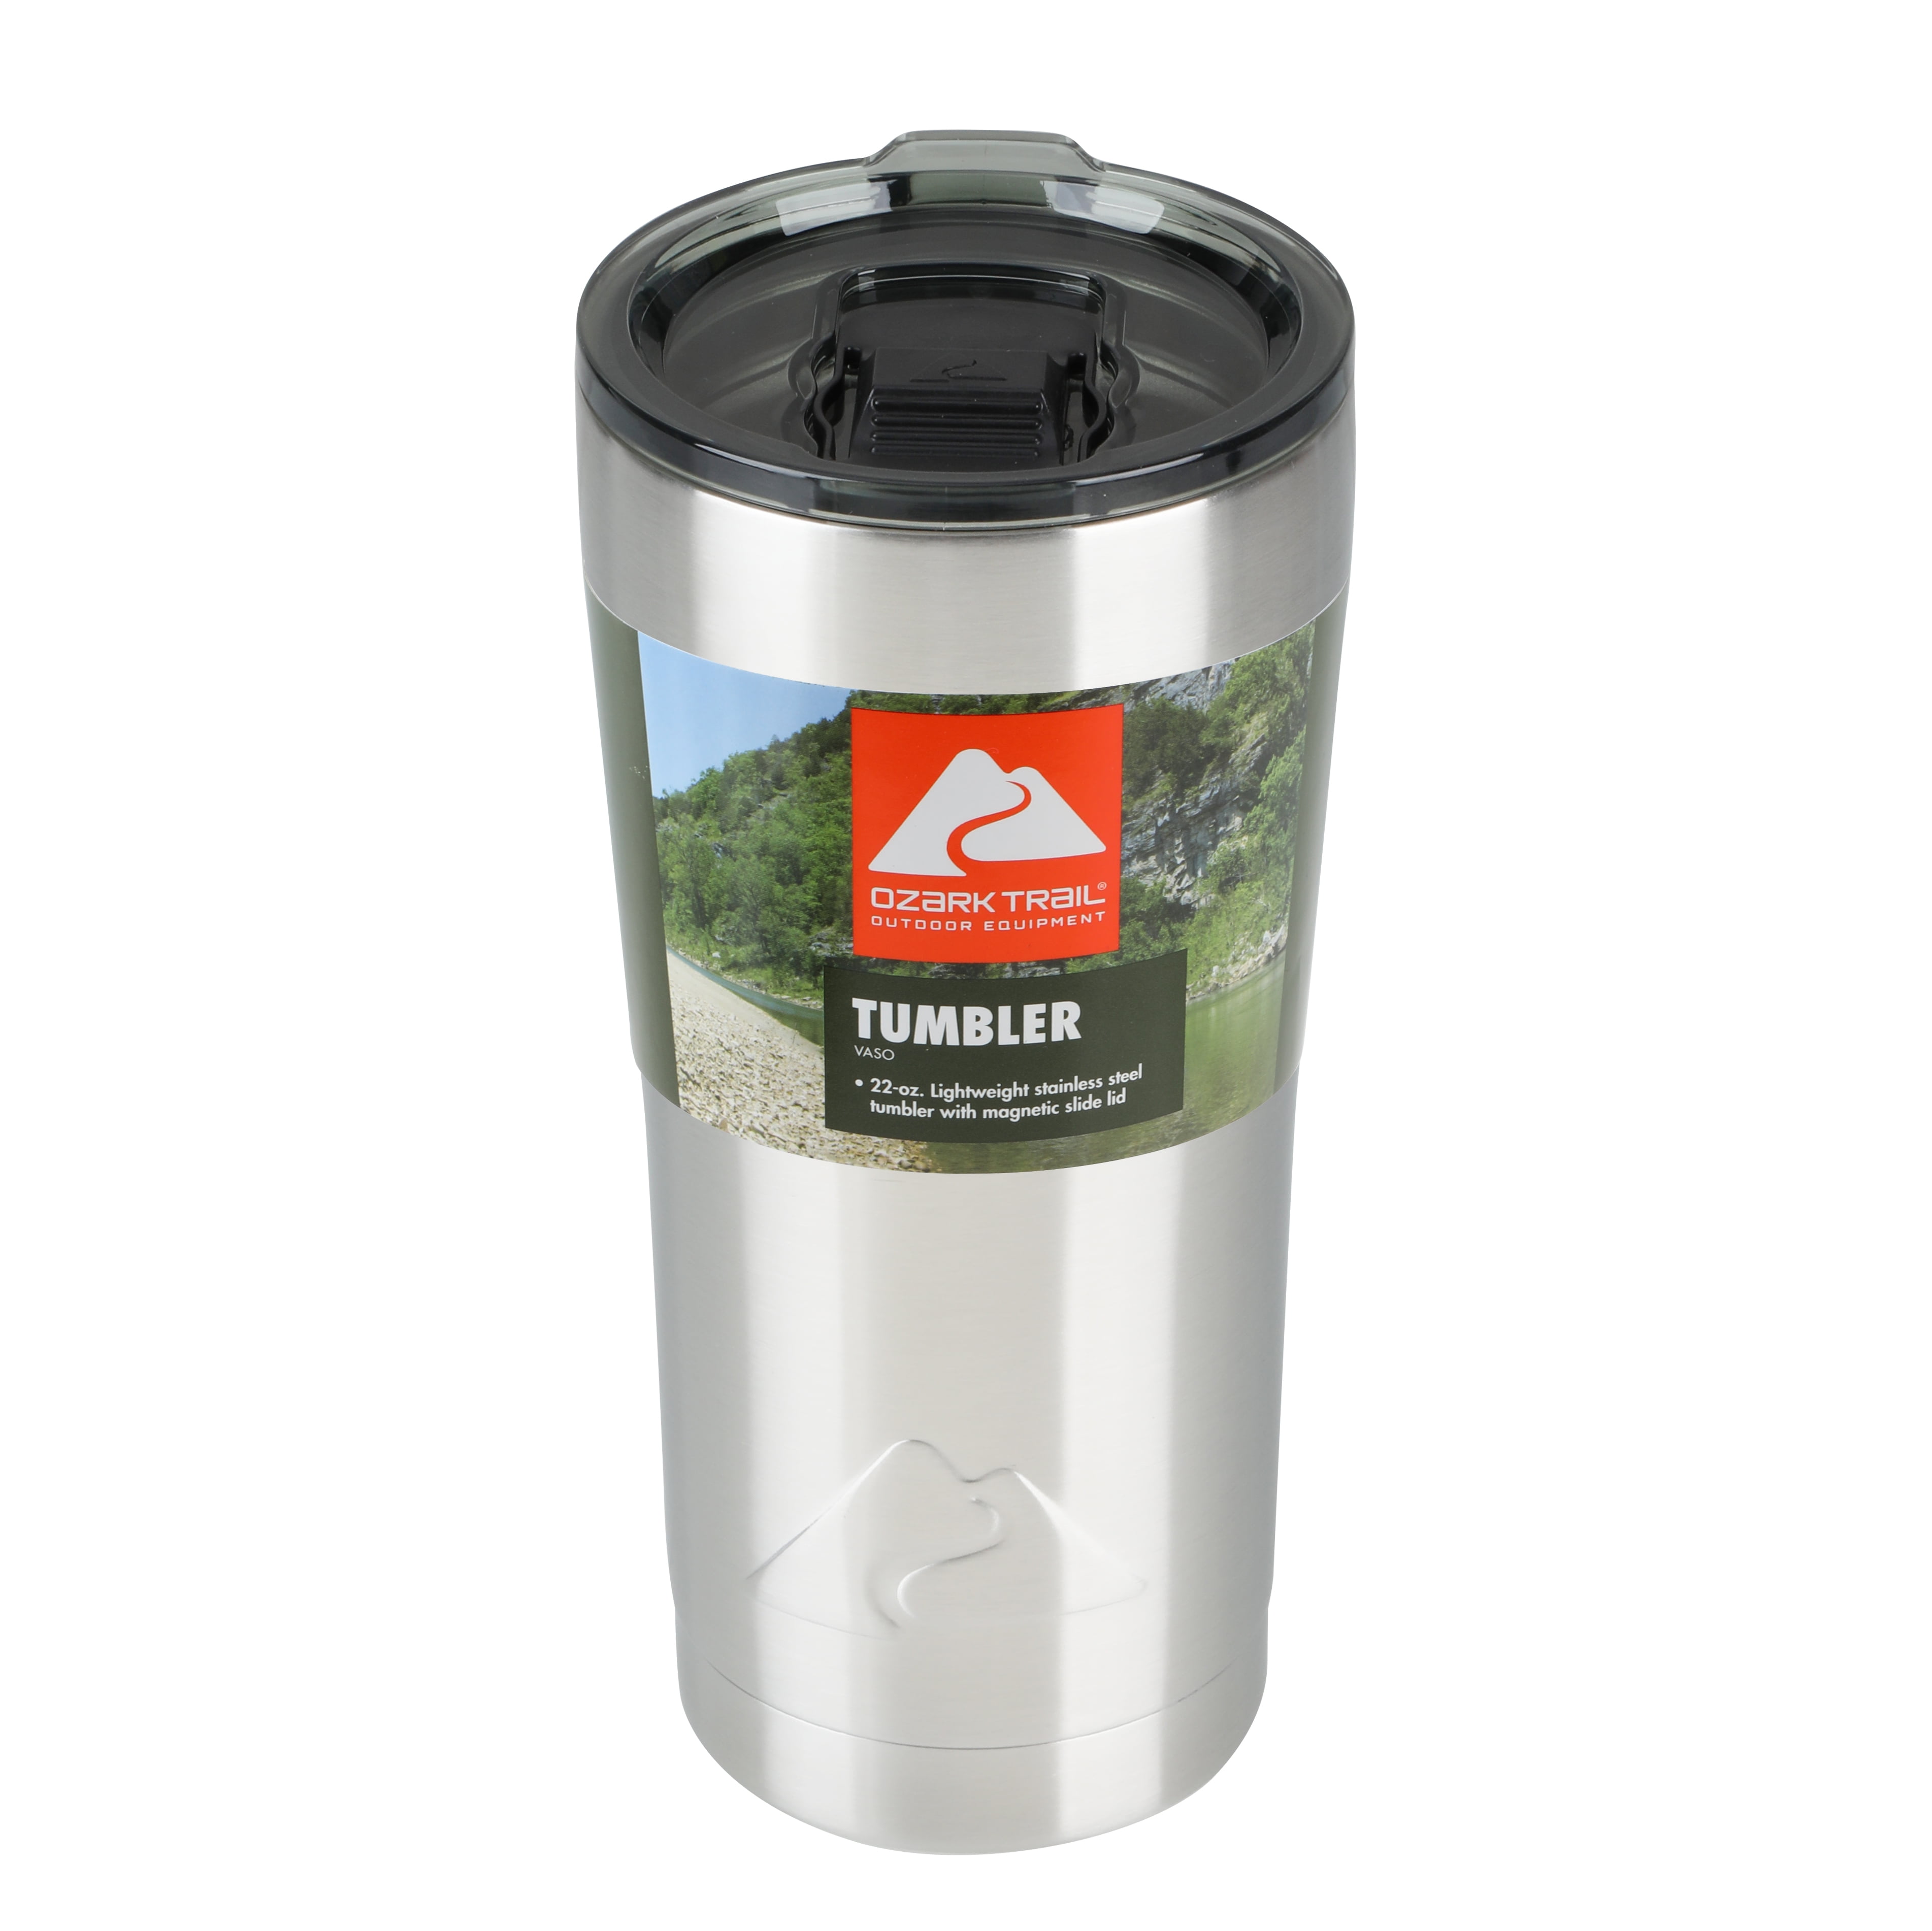 Ozark Trail Stainless Steel Vacuum Insulated Tumbler - Silver - 22 oz